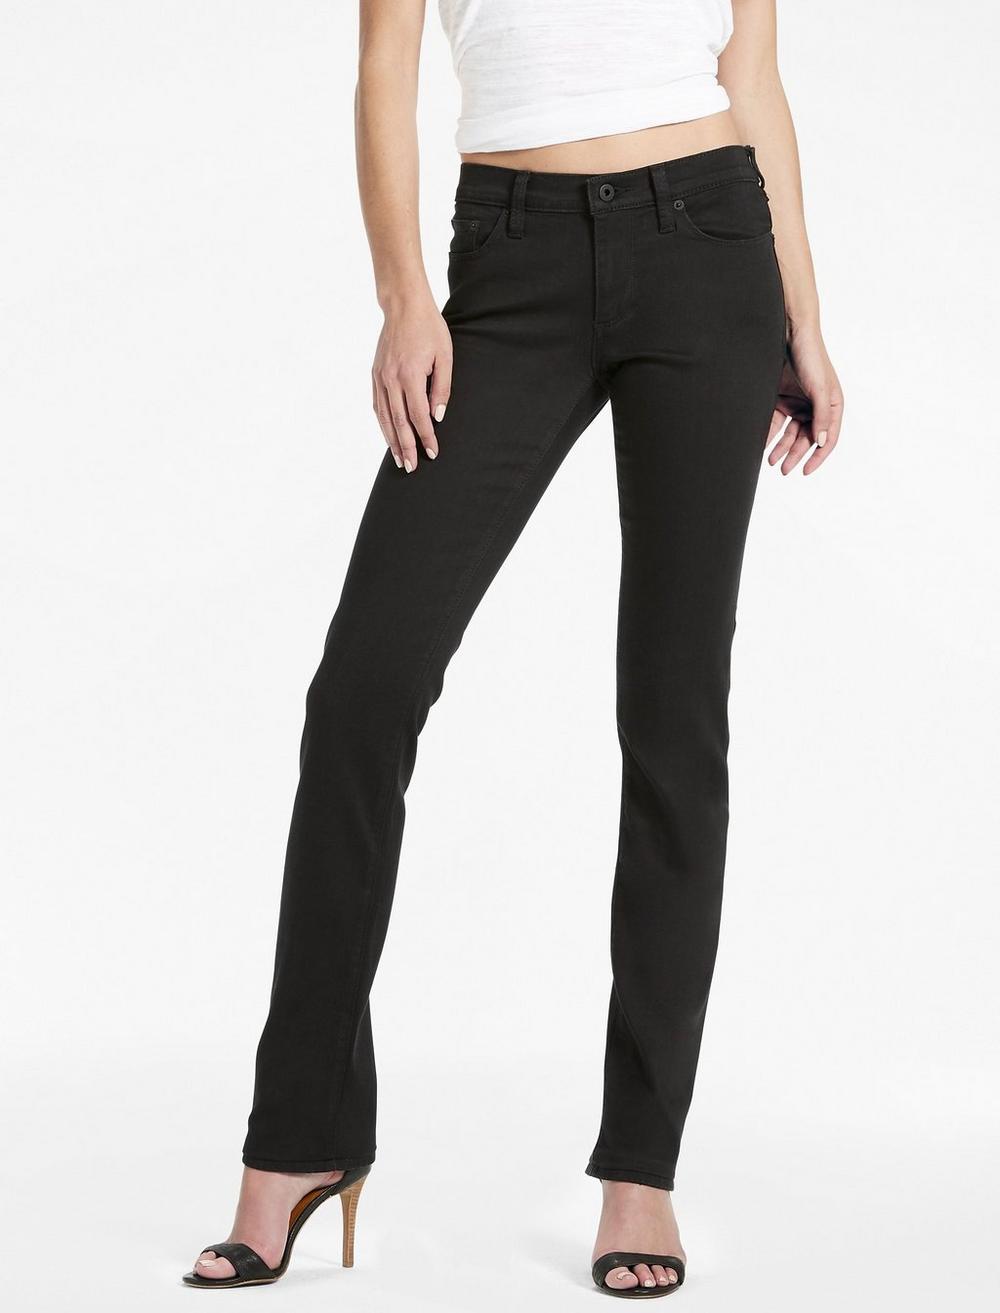 SWEET MID RISE STRAIGHT LEG JEAN IN BLACK AMBER | Lucky Brand